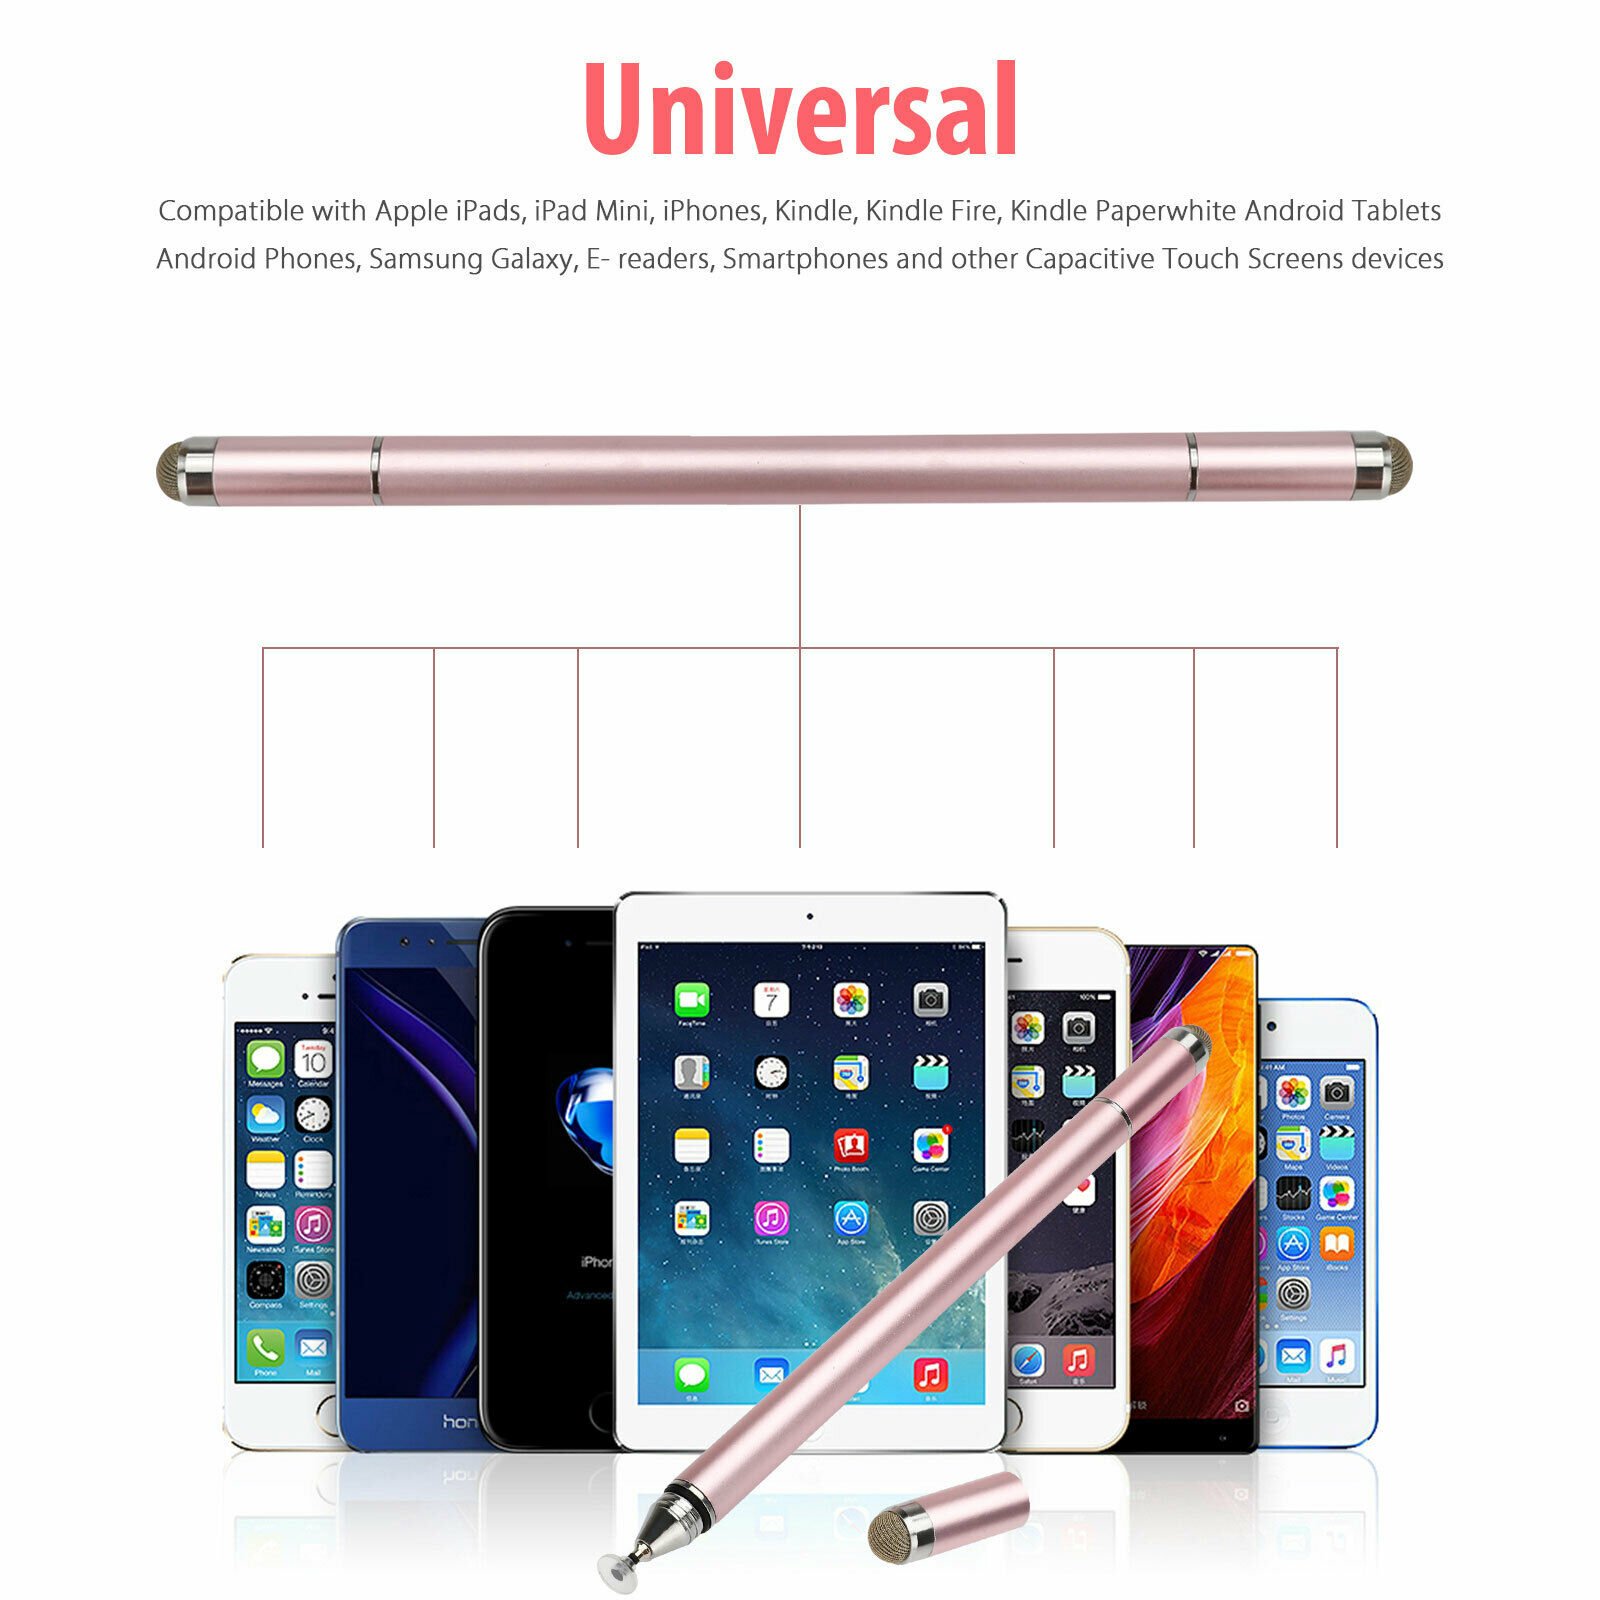 Samsung iPad 10x Pack Multi Coloured Touch Screen Universal Stylus Pen Compatible With Mobile Phone/Tablet- iPhone Kindle and All Capacitive Touch Screen Devices